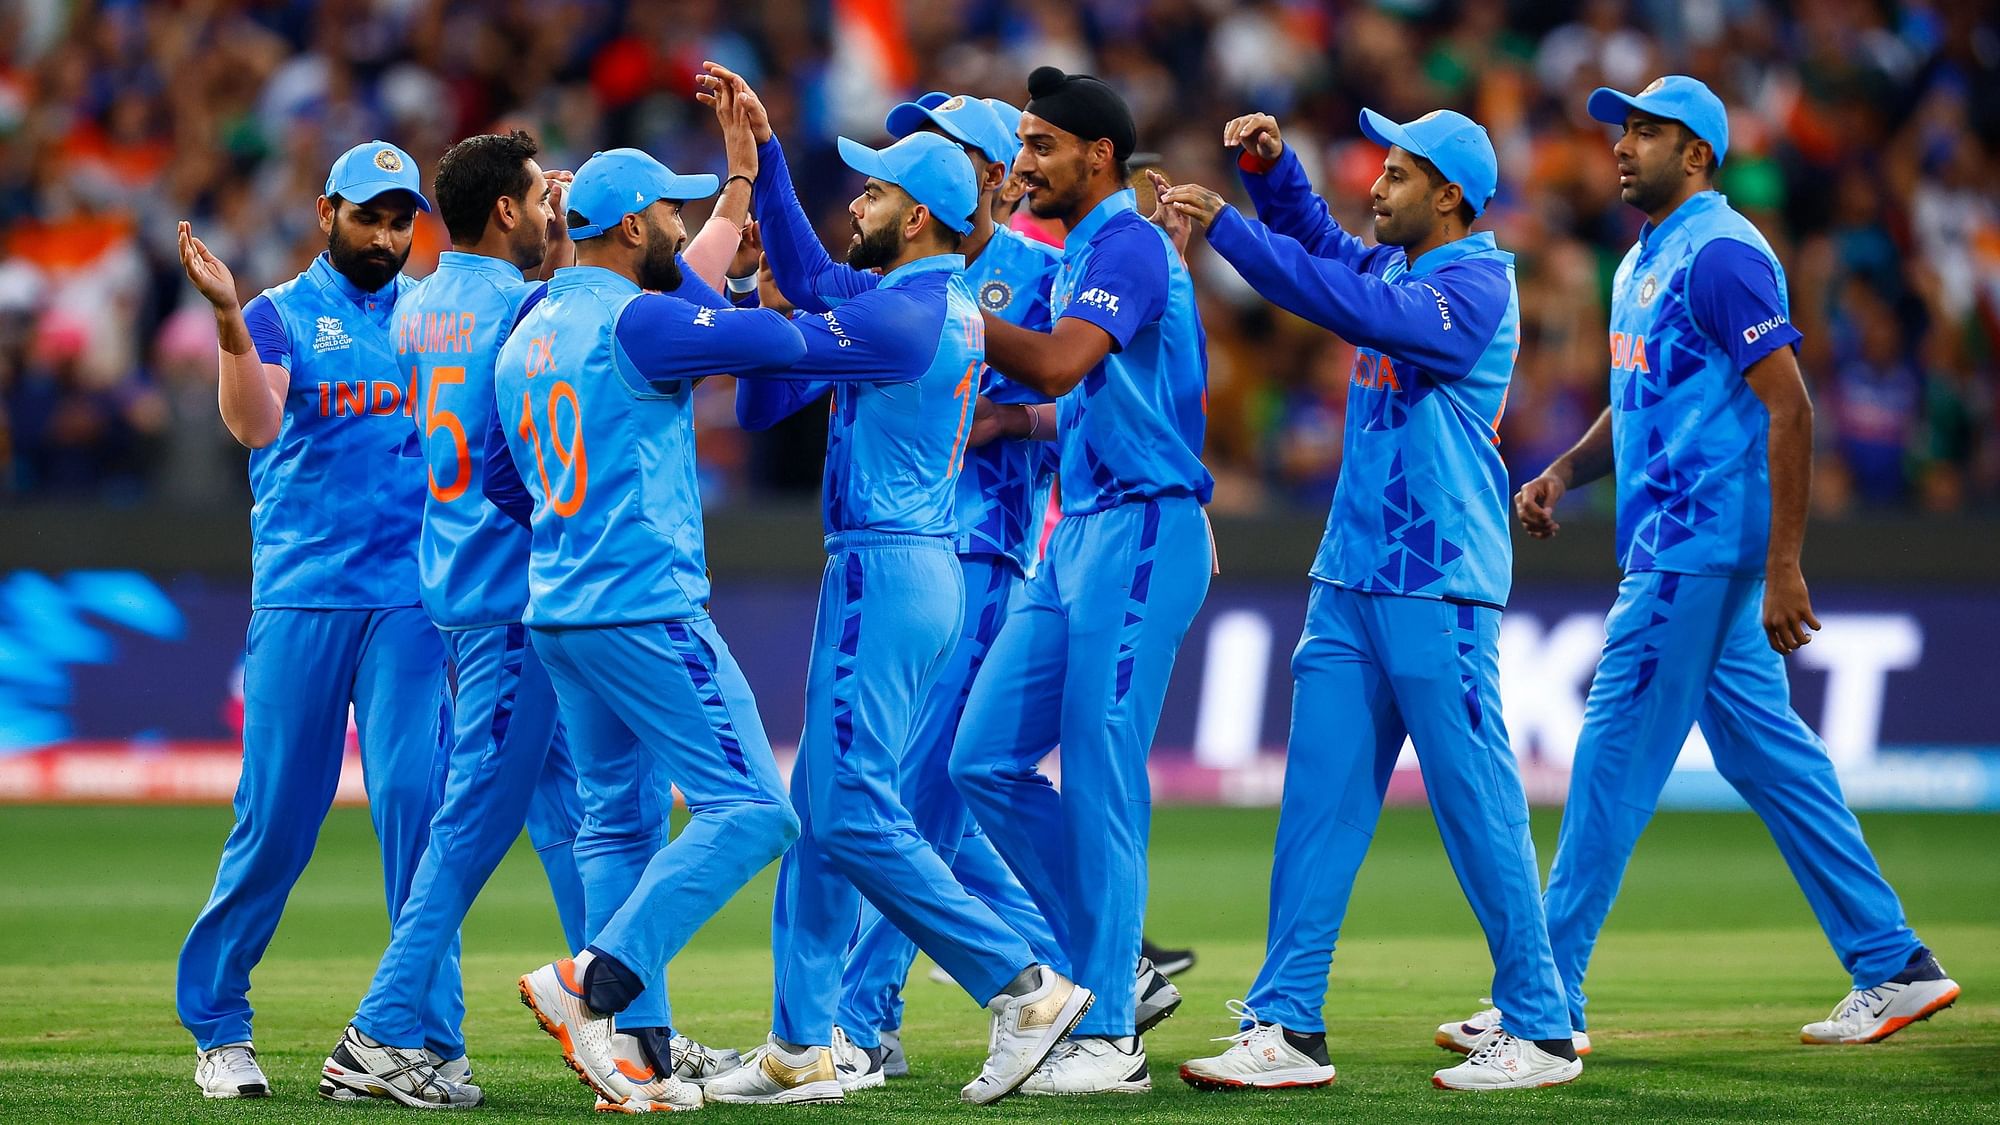 <div class="paragraphs"><p>Indian cricket team will take on Netherlands in the next Super 12 match of the T20 World Cup on 27 October.&nbsp;</p></div>